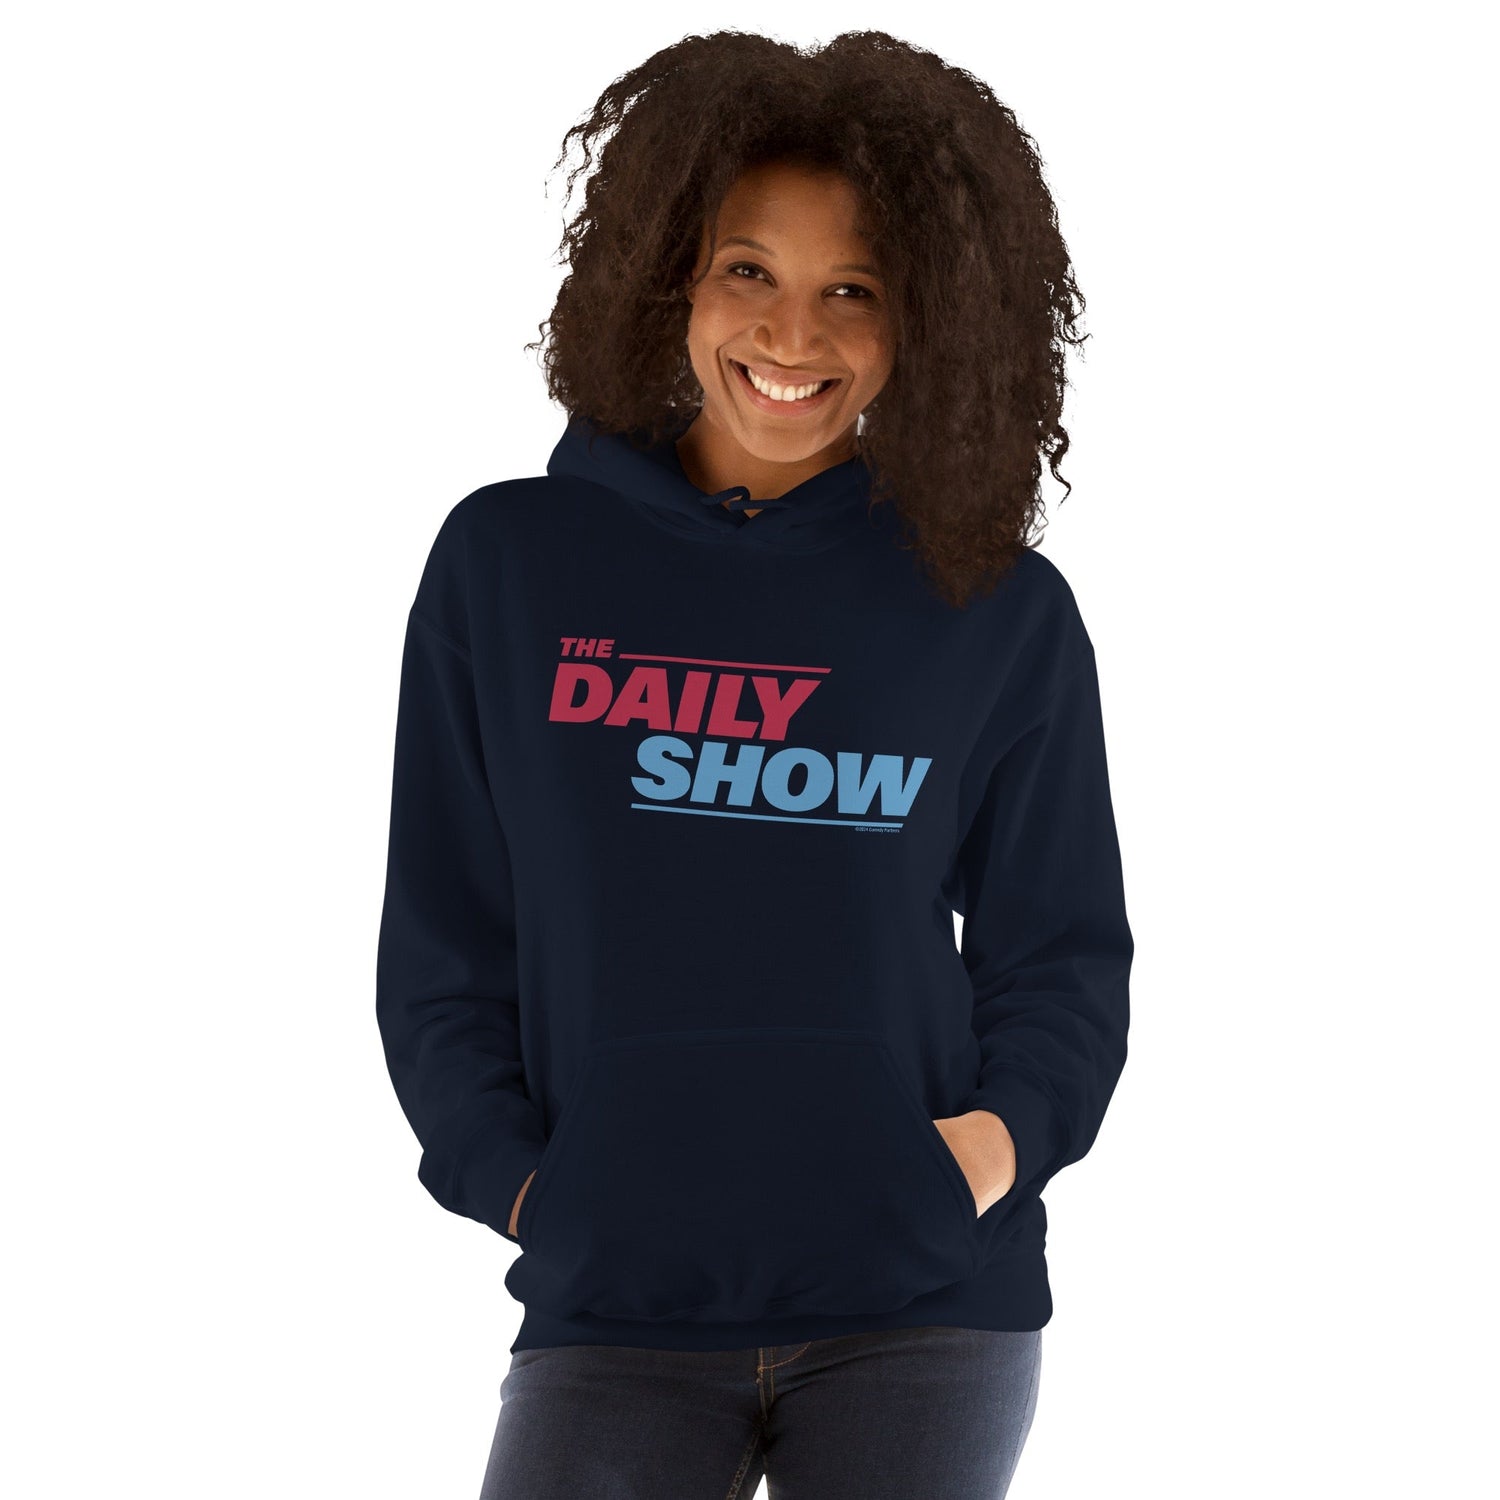 The Daily Show Logo Unisex Hoodie - Paramount Shop